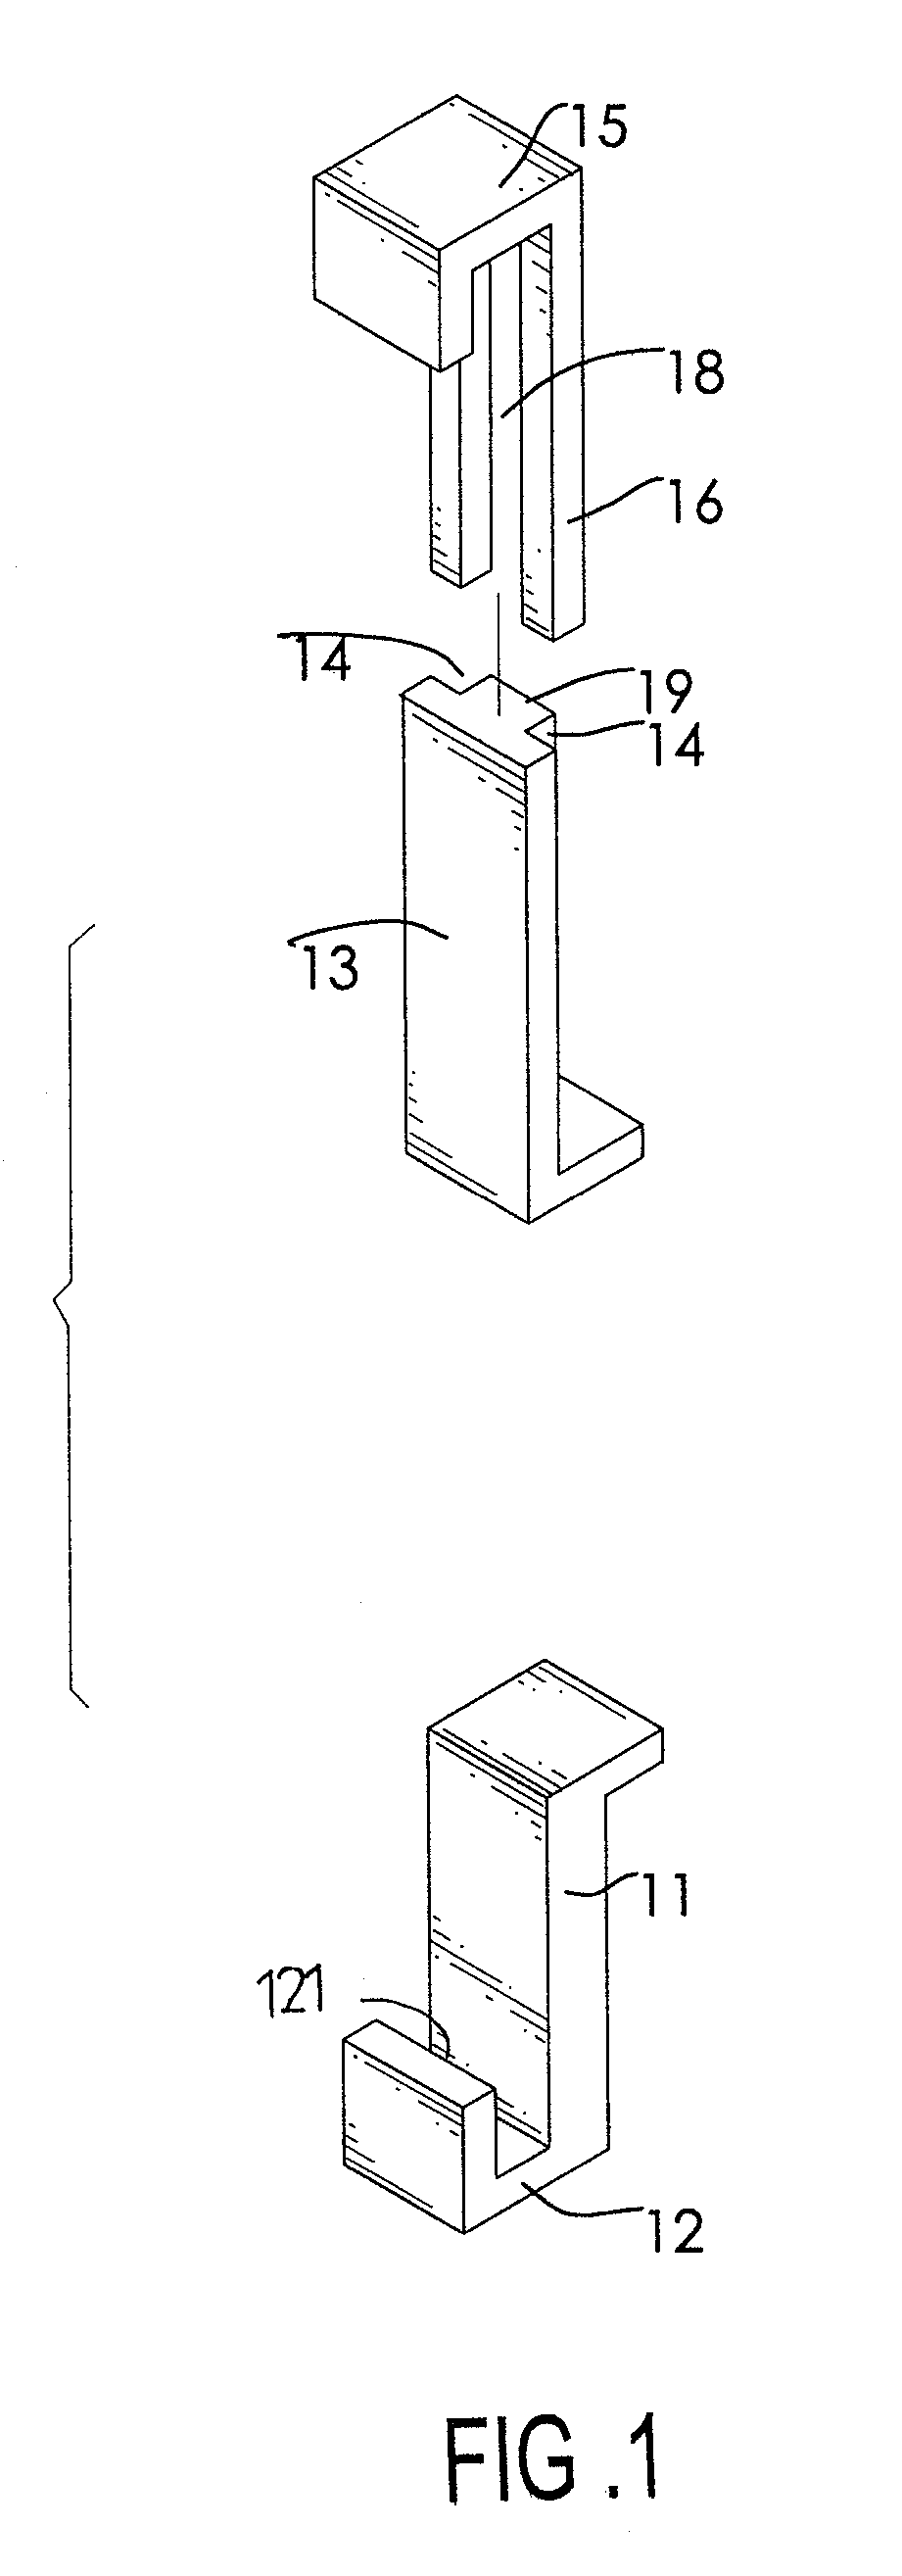 Detachable screen protector assembly with a fastening apparatus